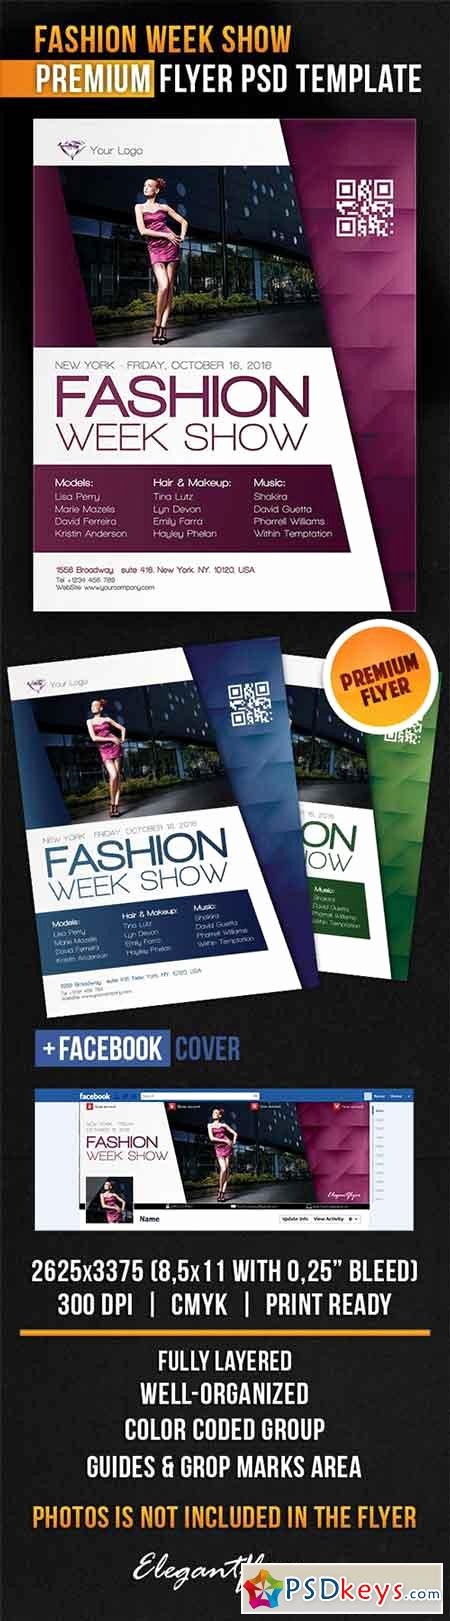 Fashion Show Flyers Template New Free Download Shop Vector Stock Image Via torrent